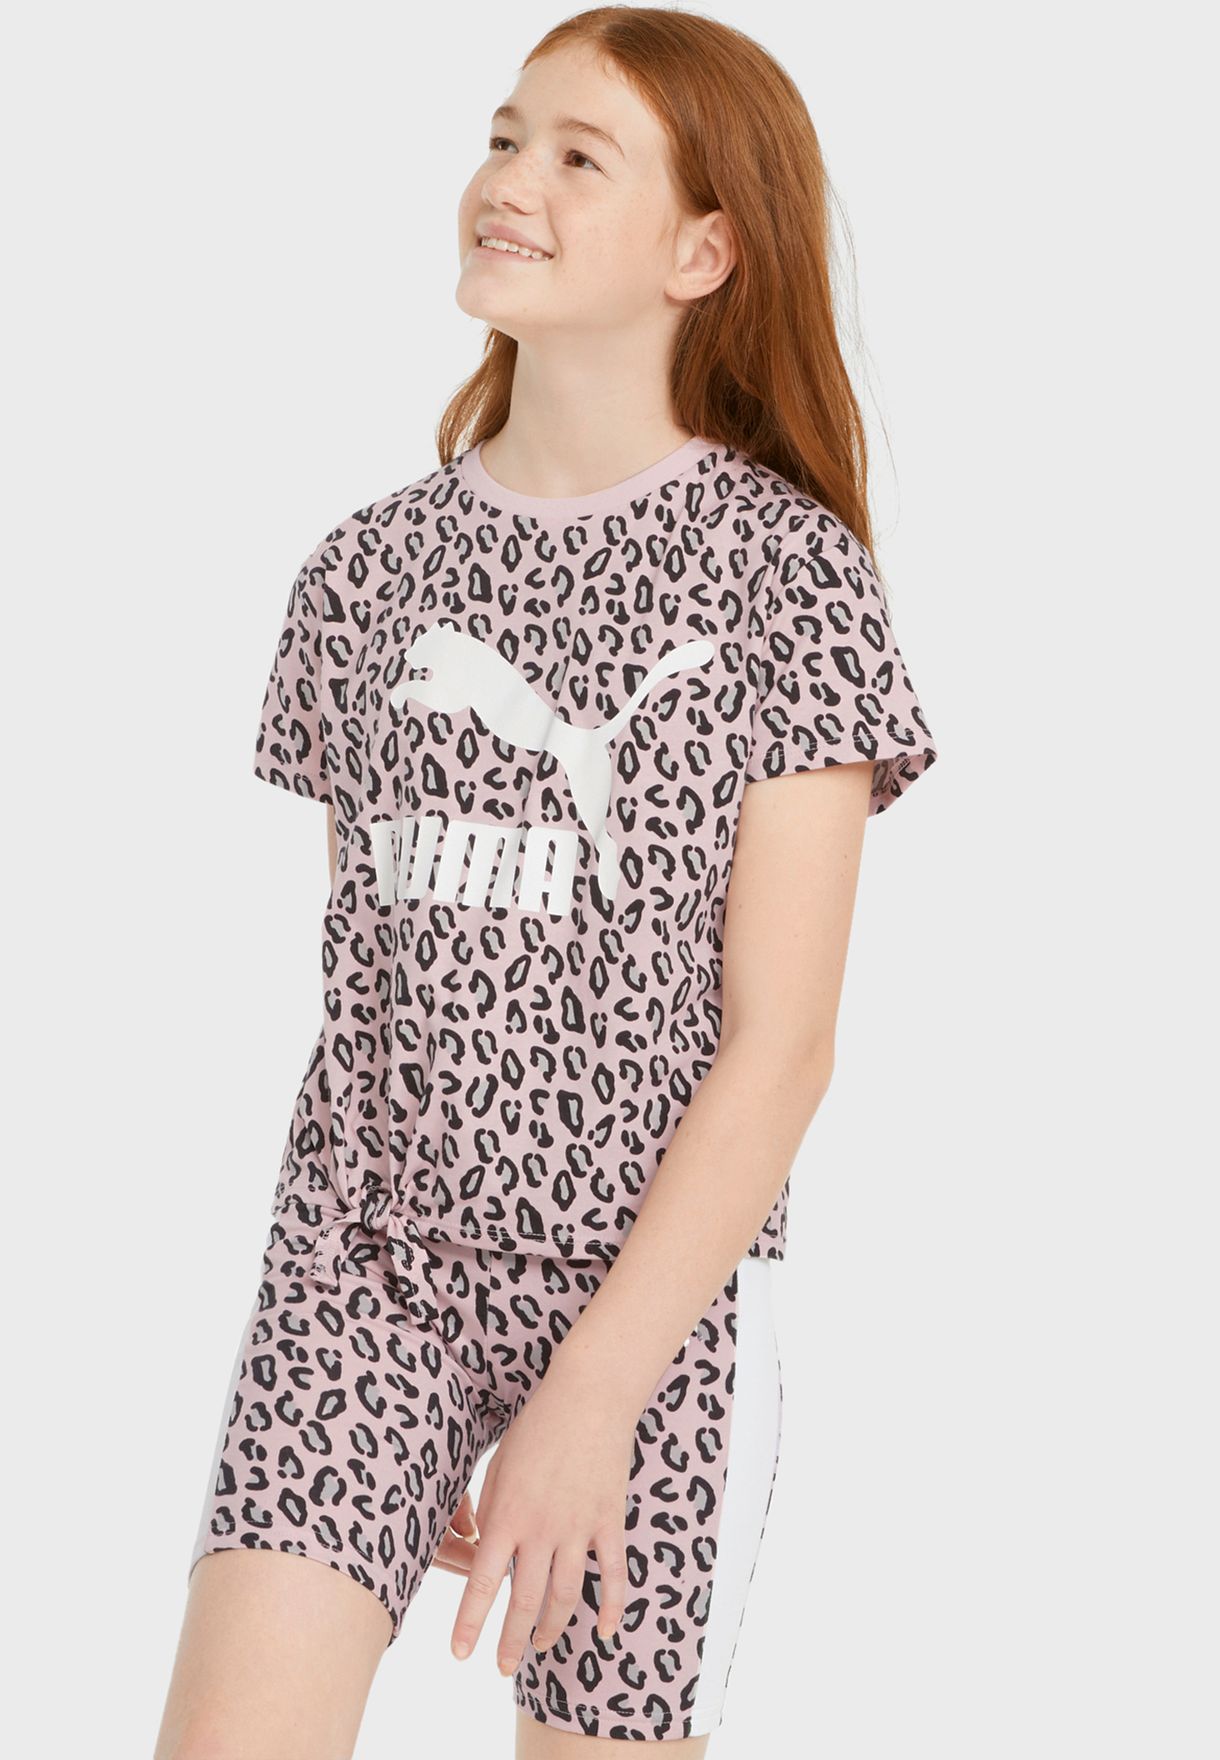 Youth Classics Summer Roar Aop Knotted T-Shirt